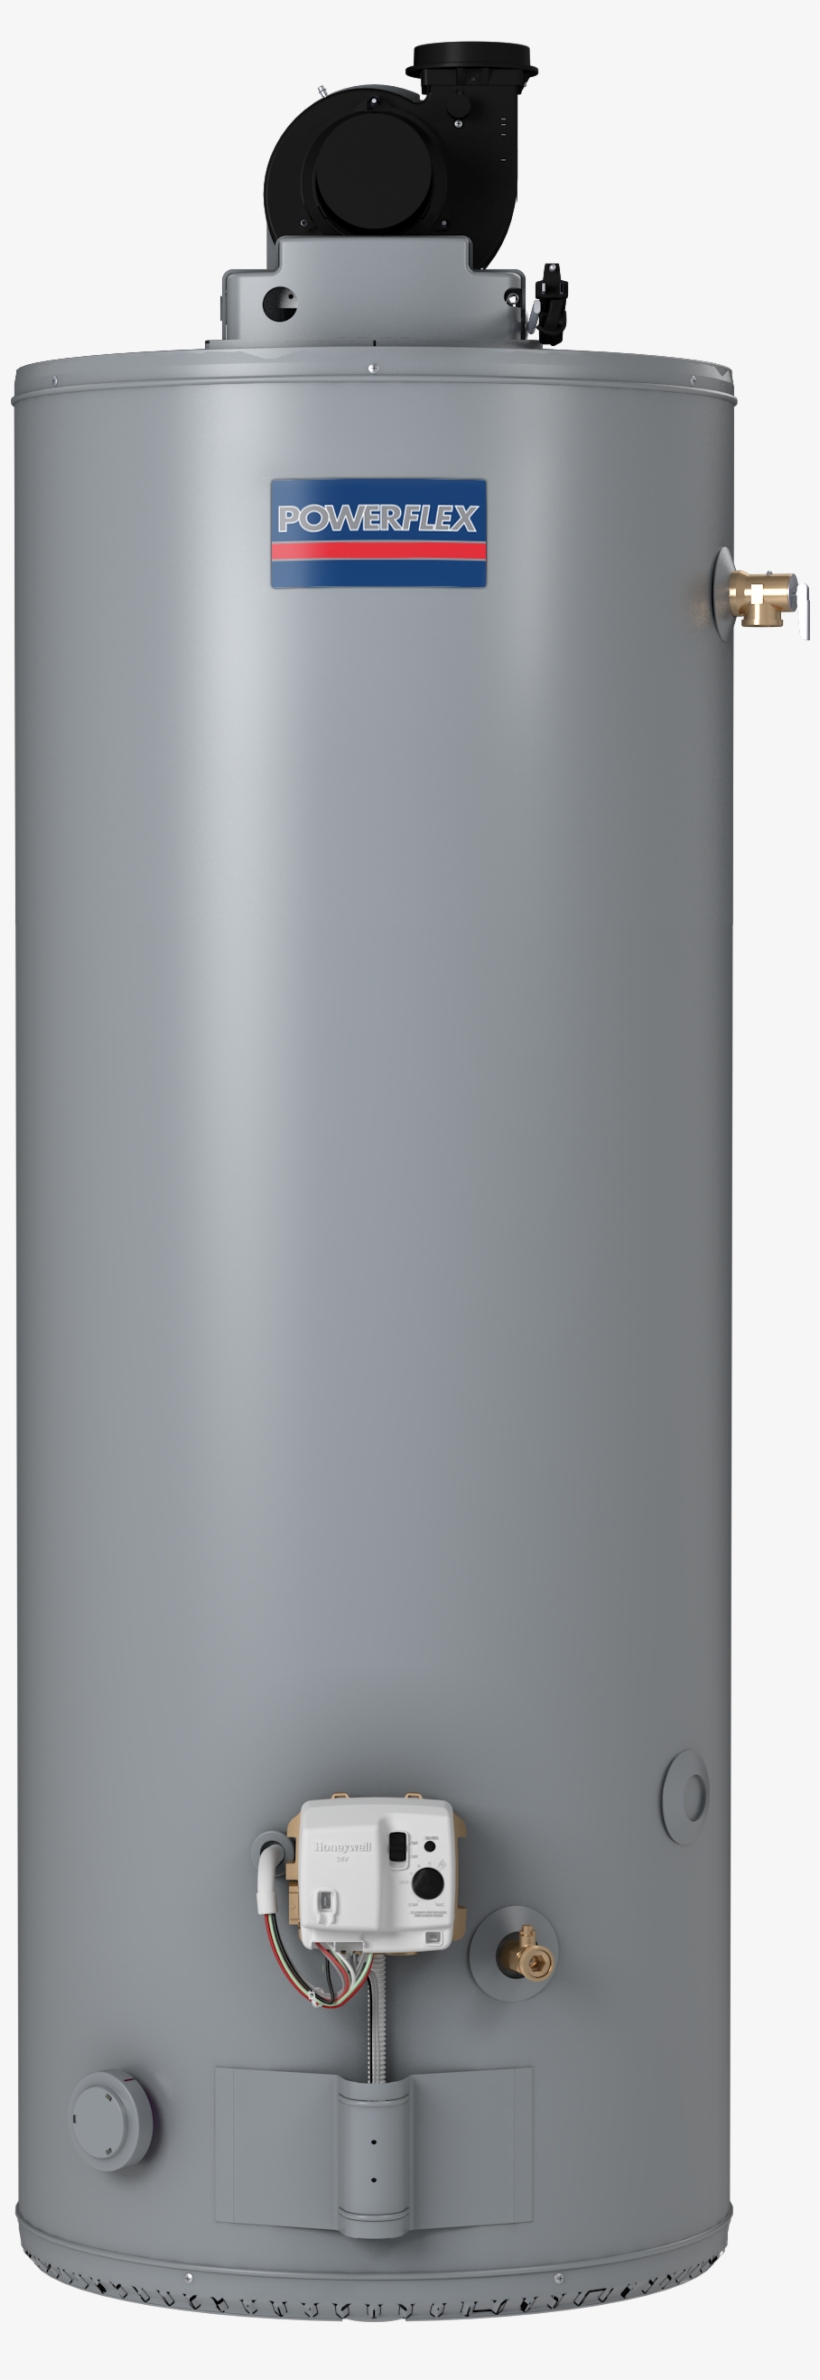 Png - State Water Heaters Proline Commercial Grade, transparent png #2649796